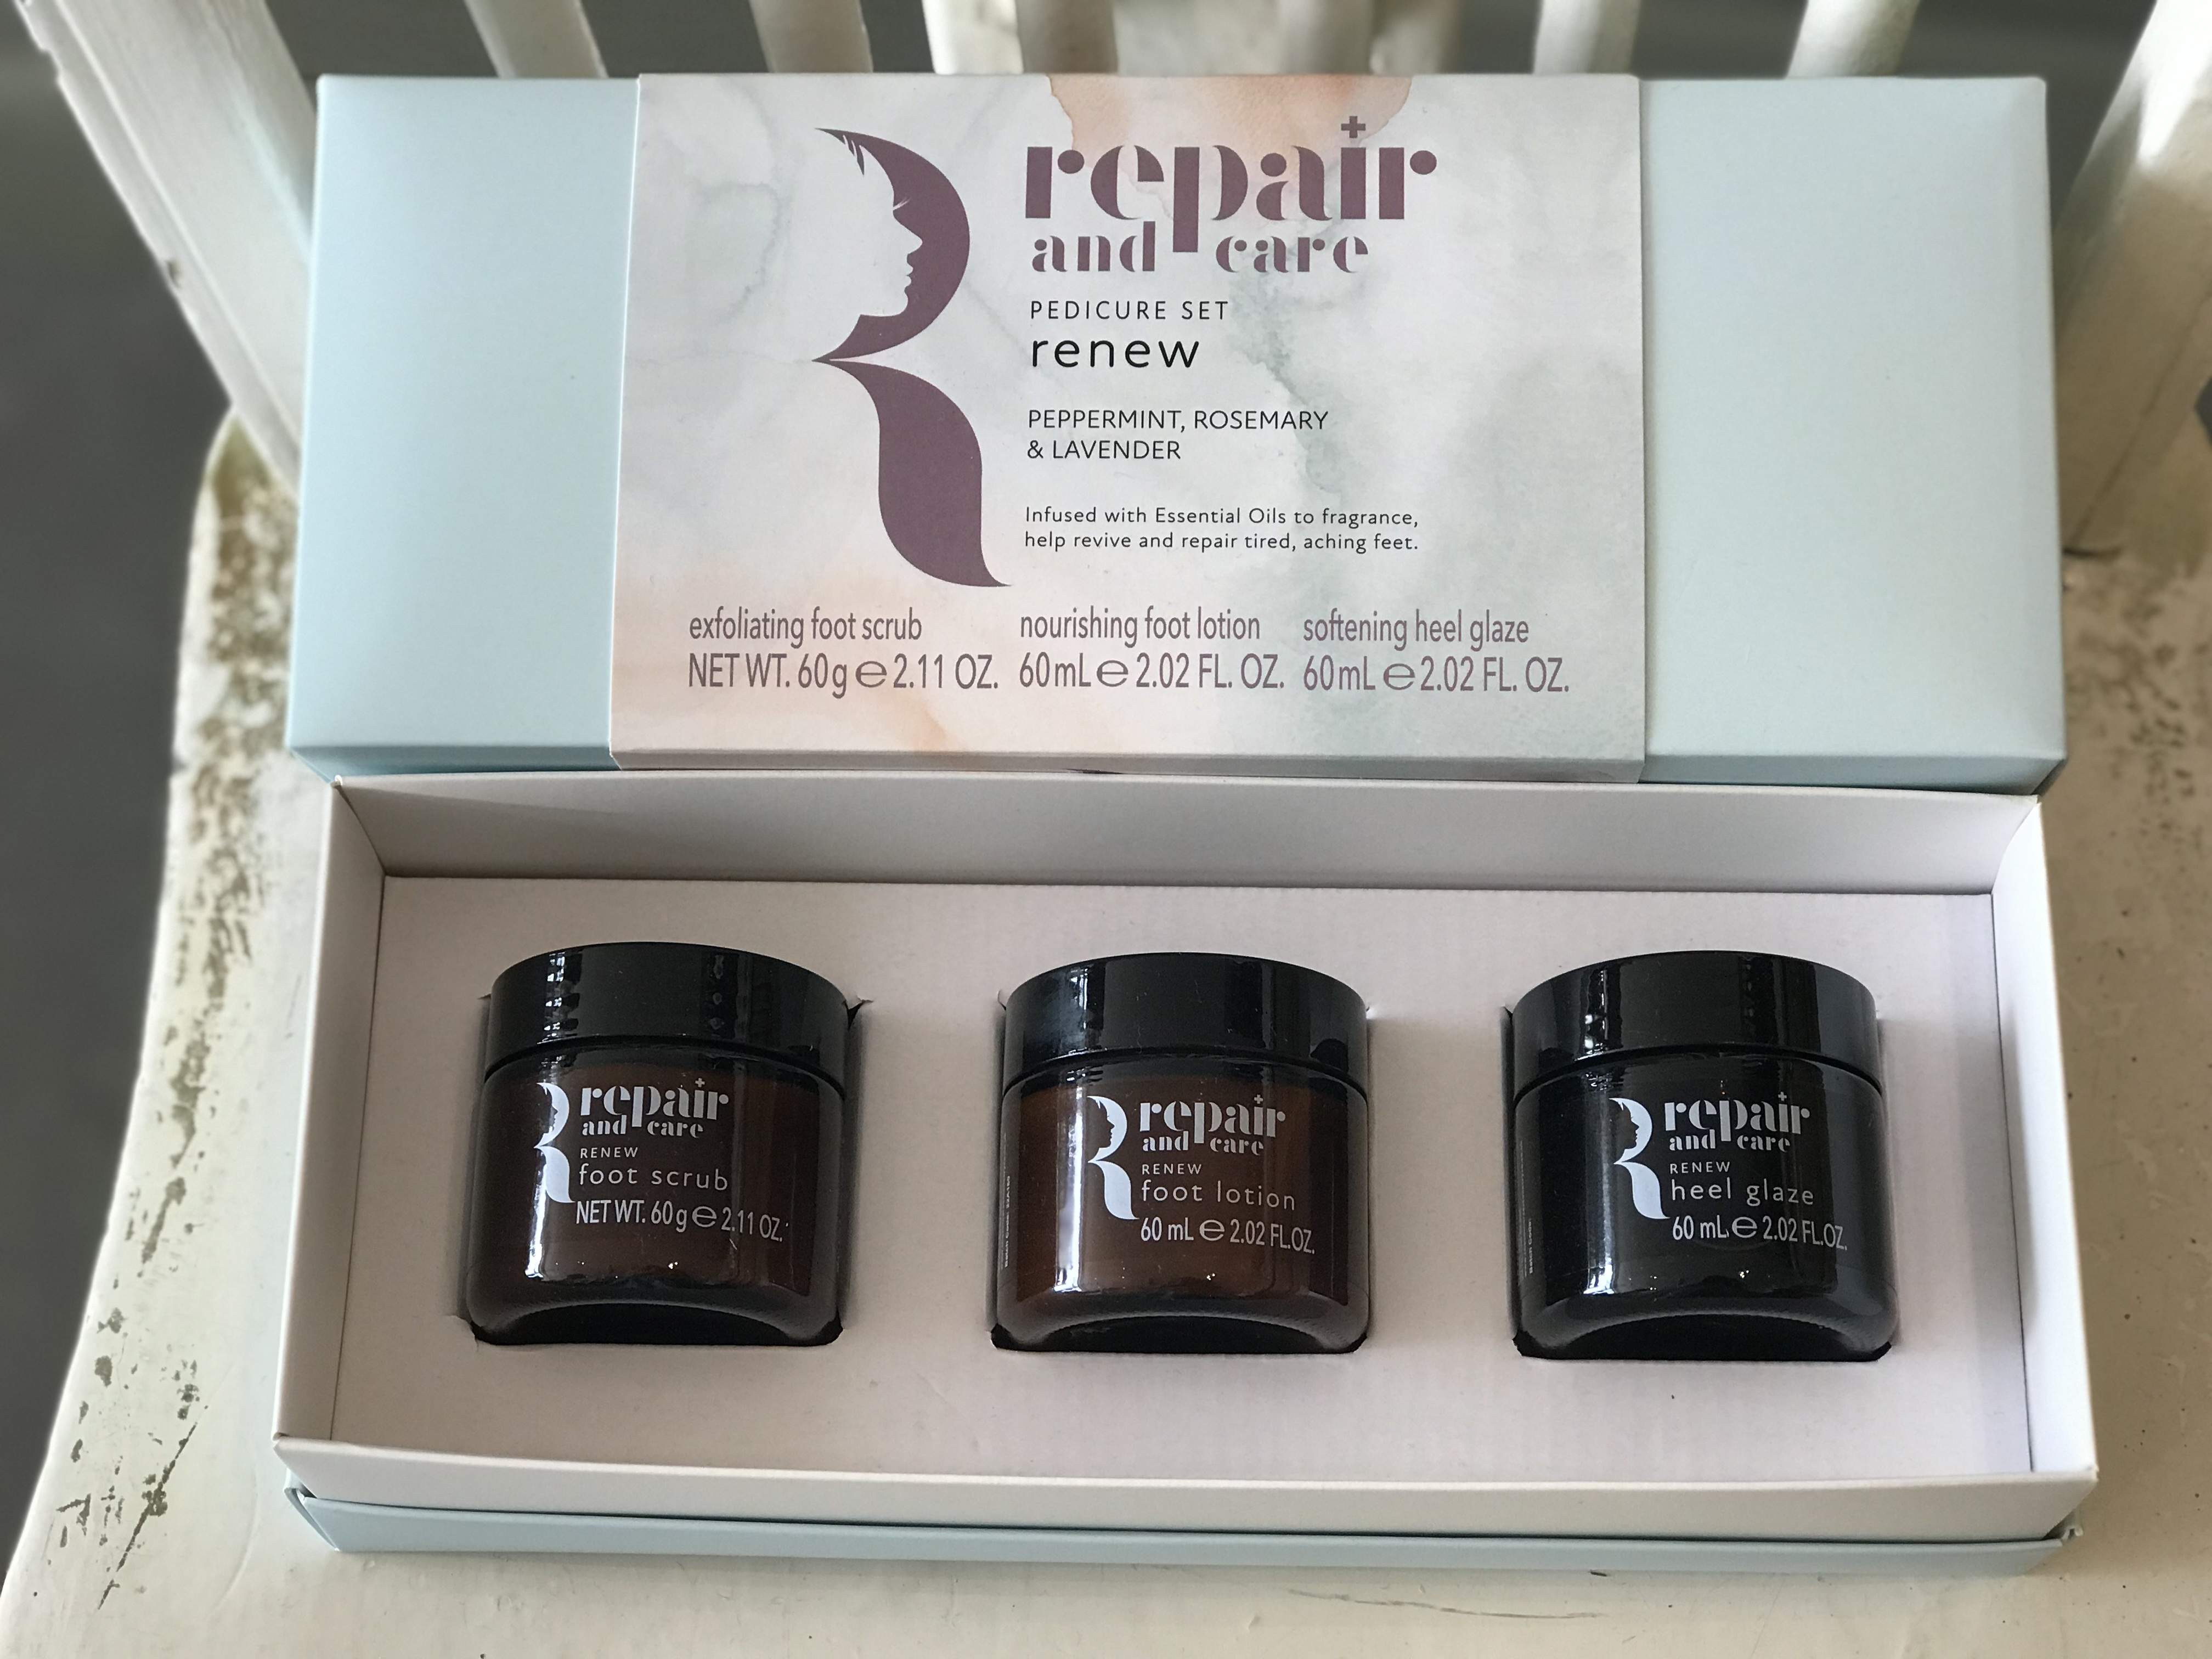 Somerset Repair and Care De-Stress/Renew Gift Sets